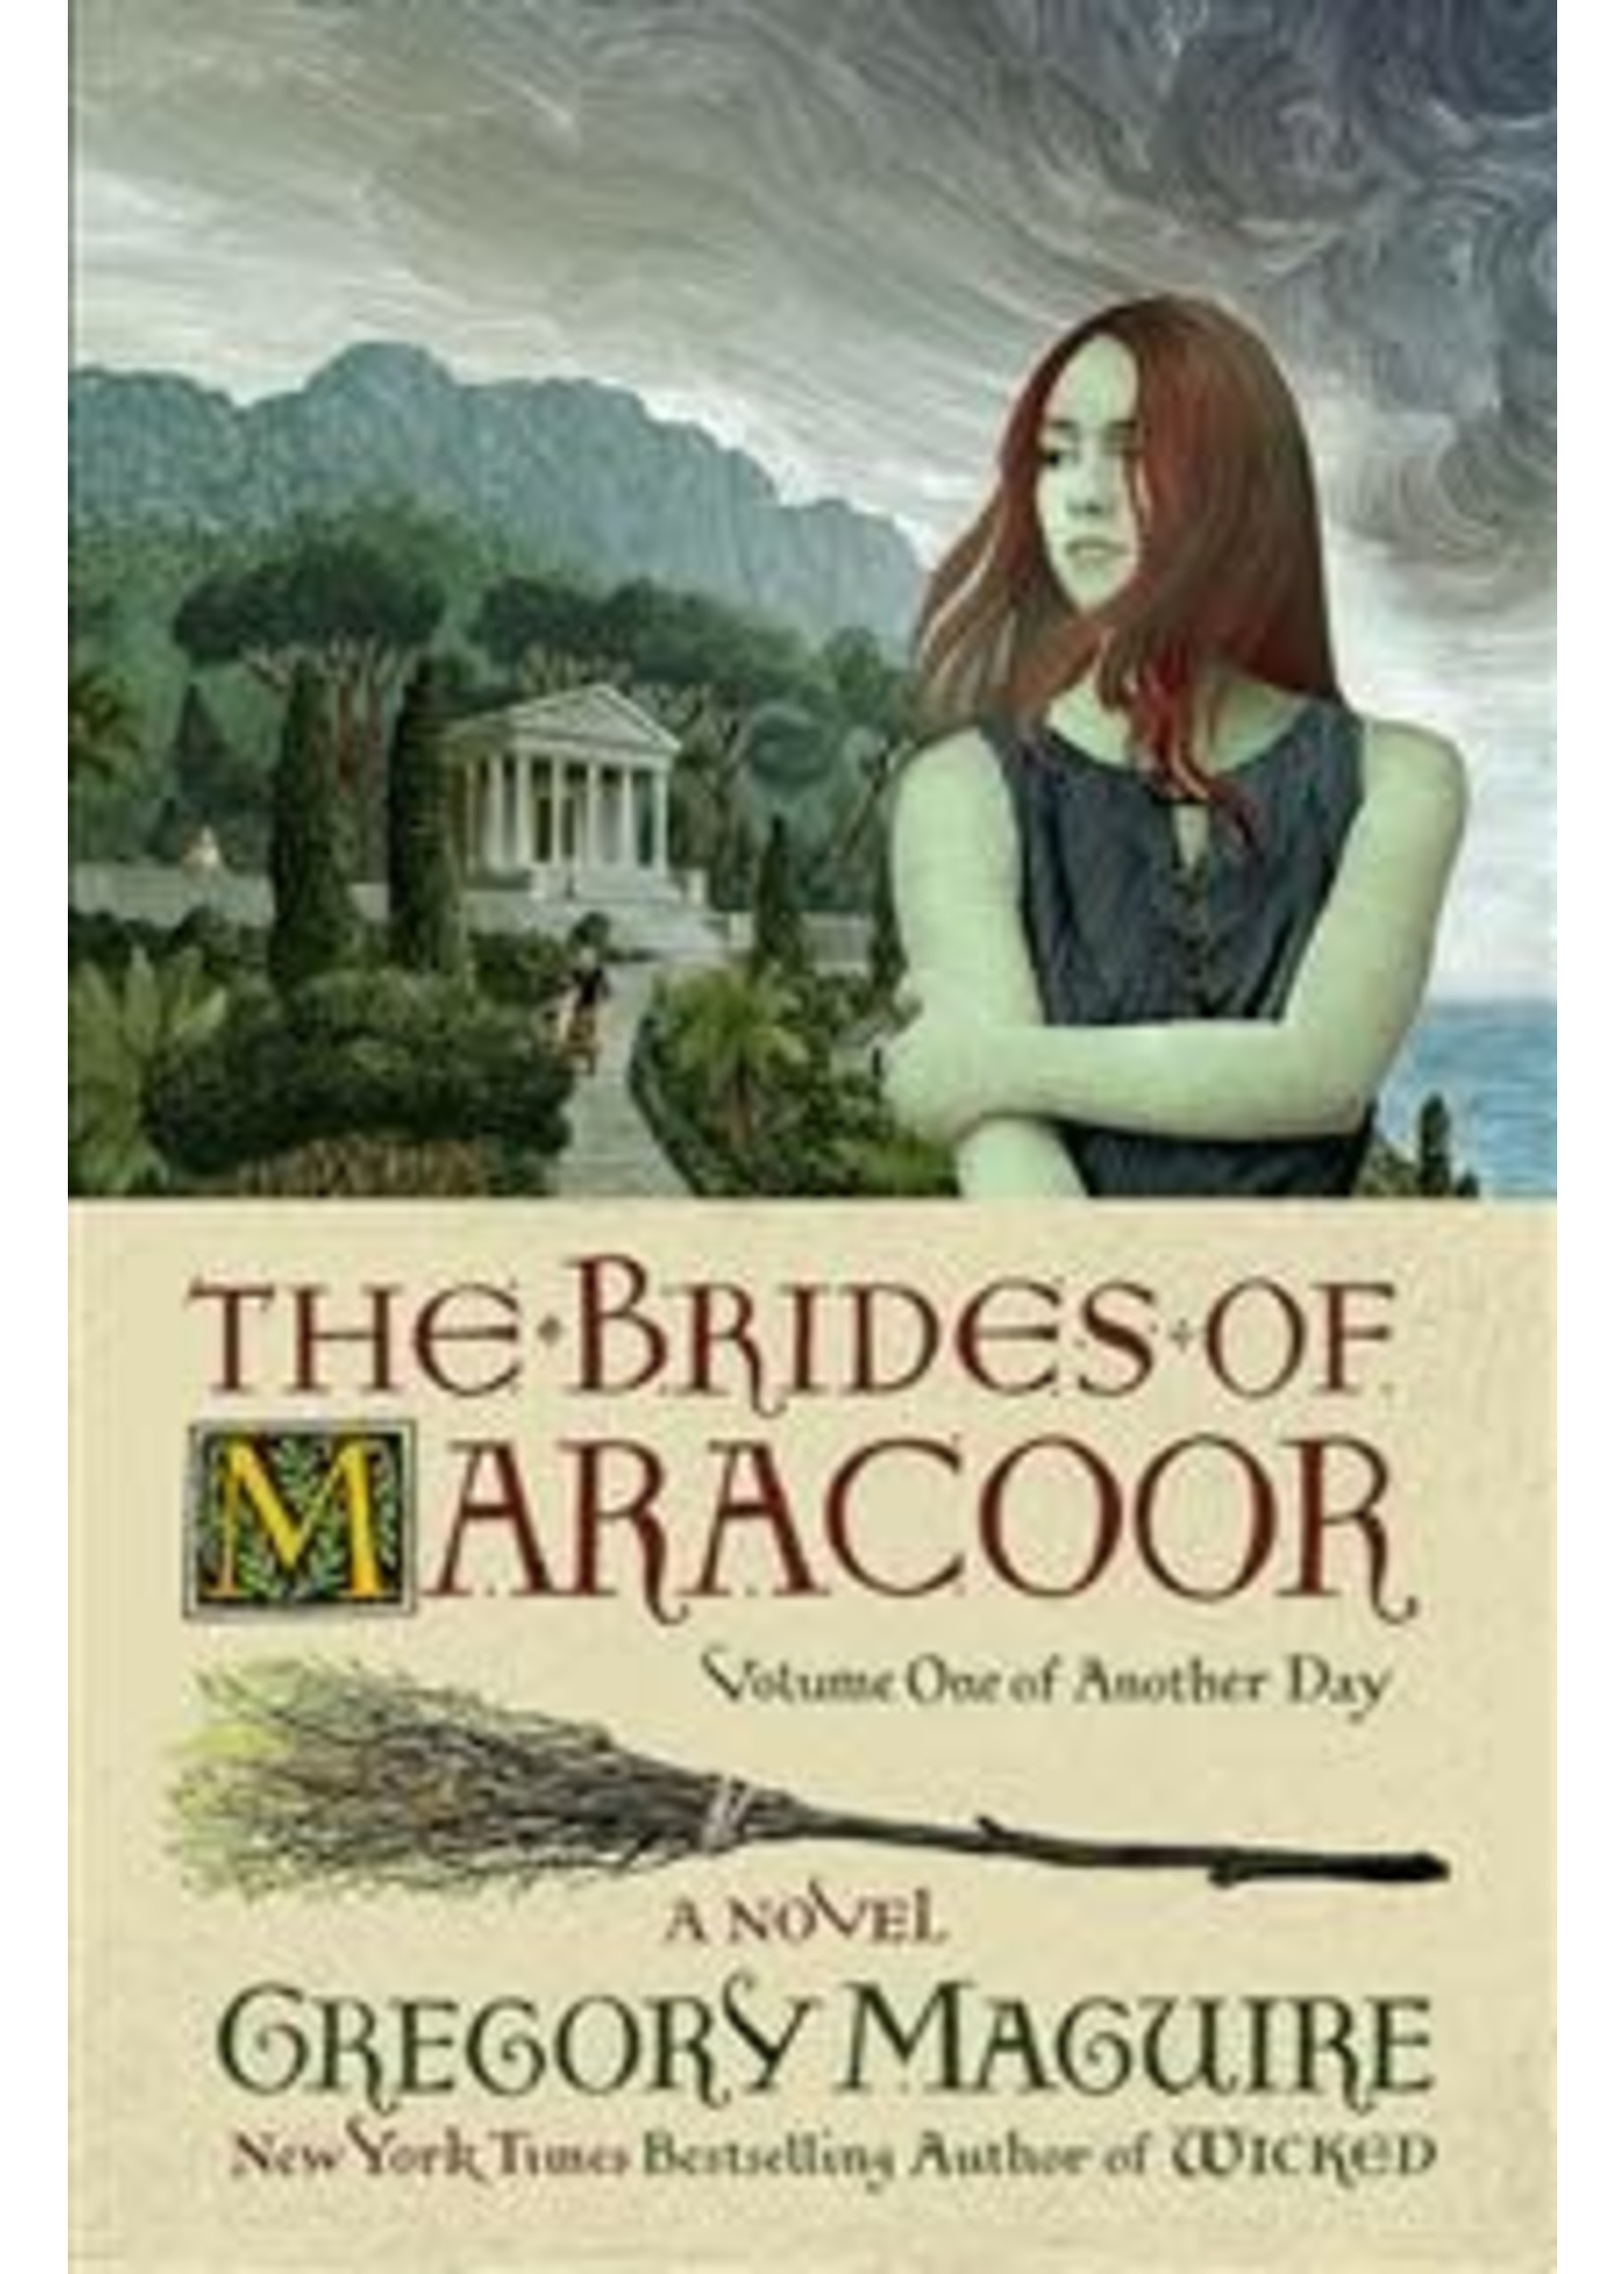 The Brides of Maracoor (Another Day #1) by Gregory Maguire